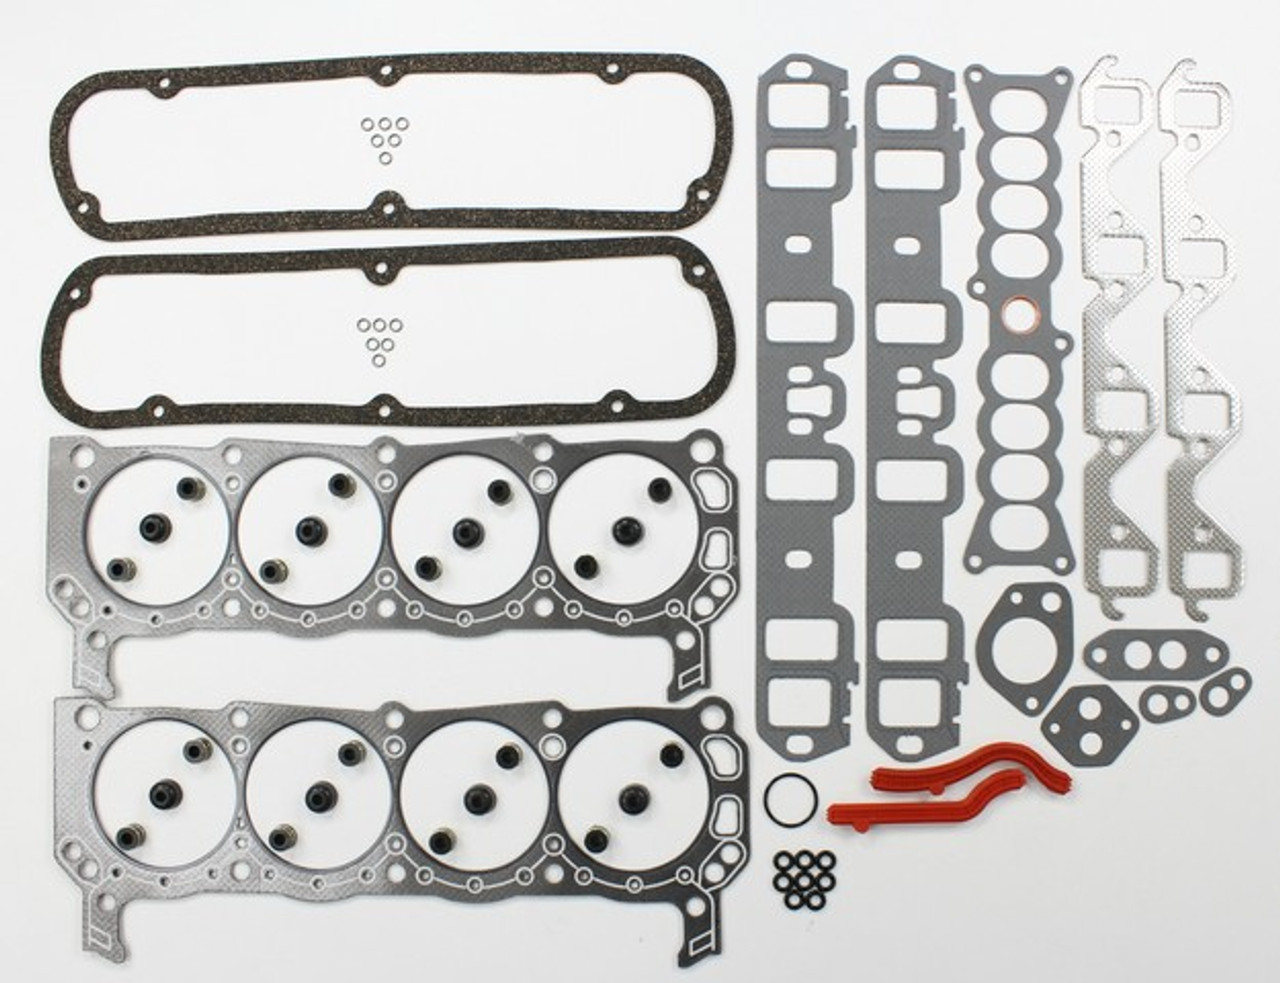 1989 Ford Country Squire 5.0L Head Gasket Set HGS4104.E3